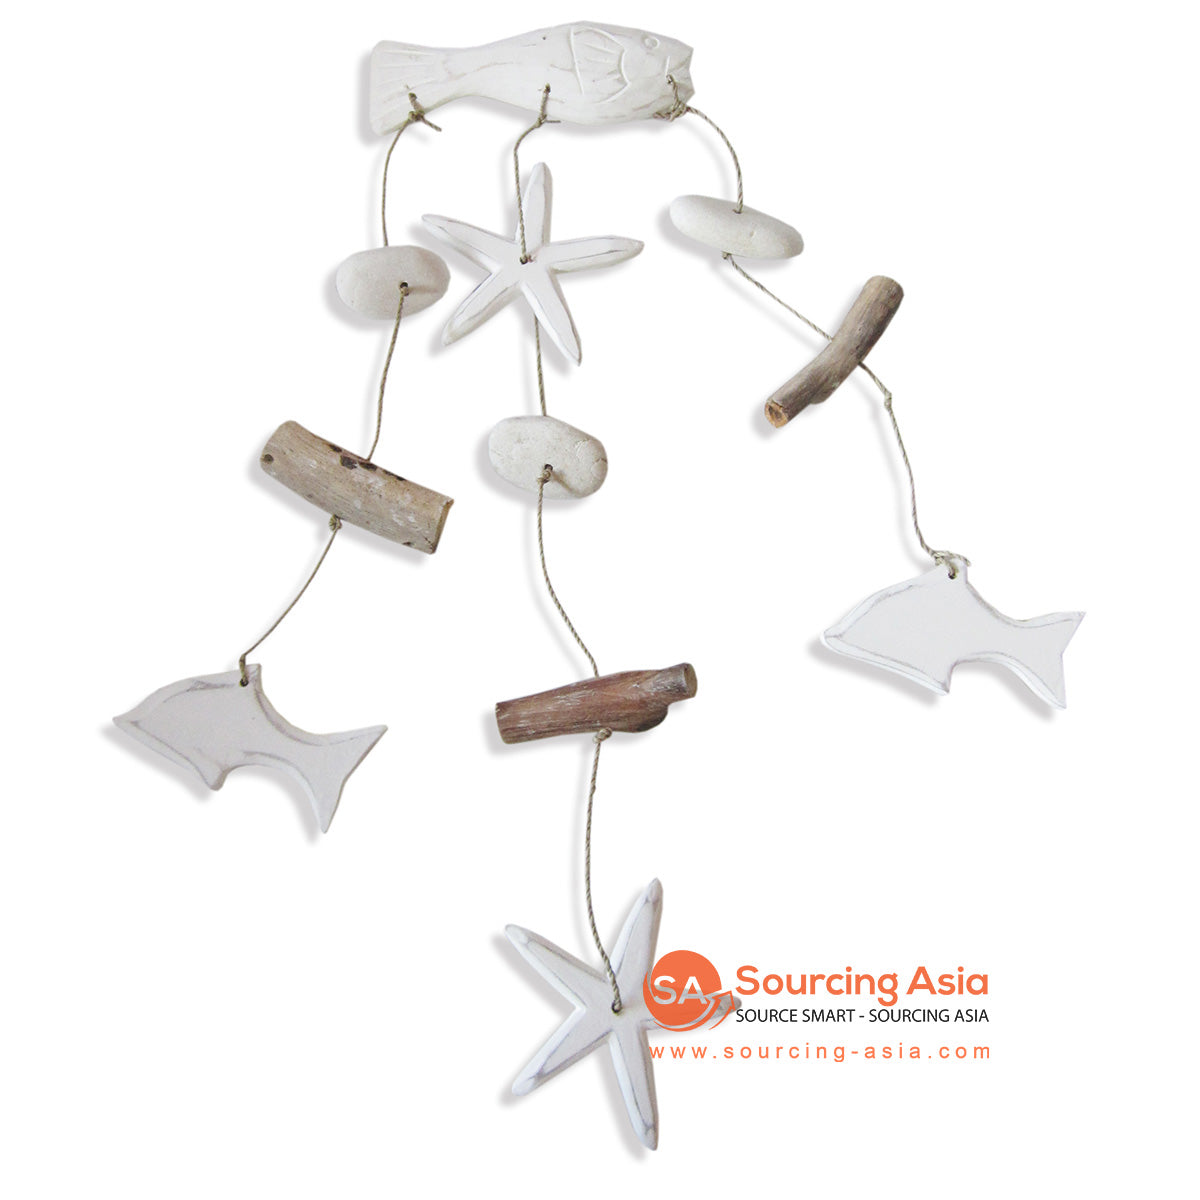 HAN008 WHITE DRIFTWOOD "SEA CREATURES" HANGING DECORATION